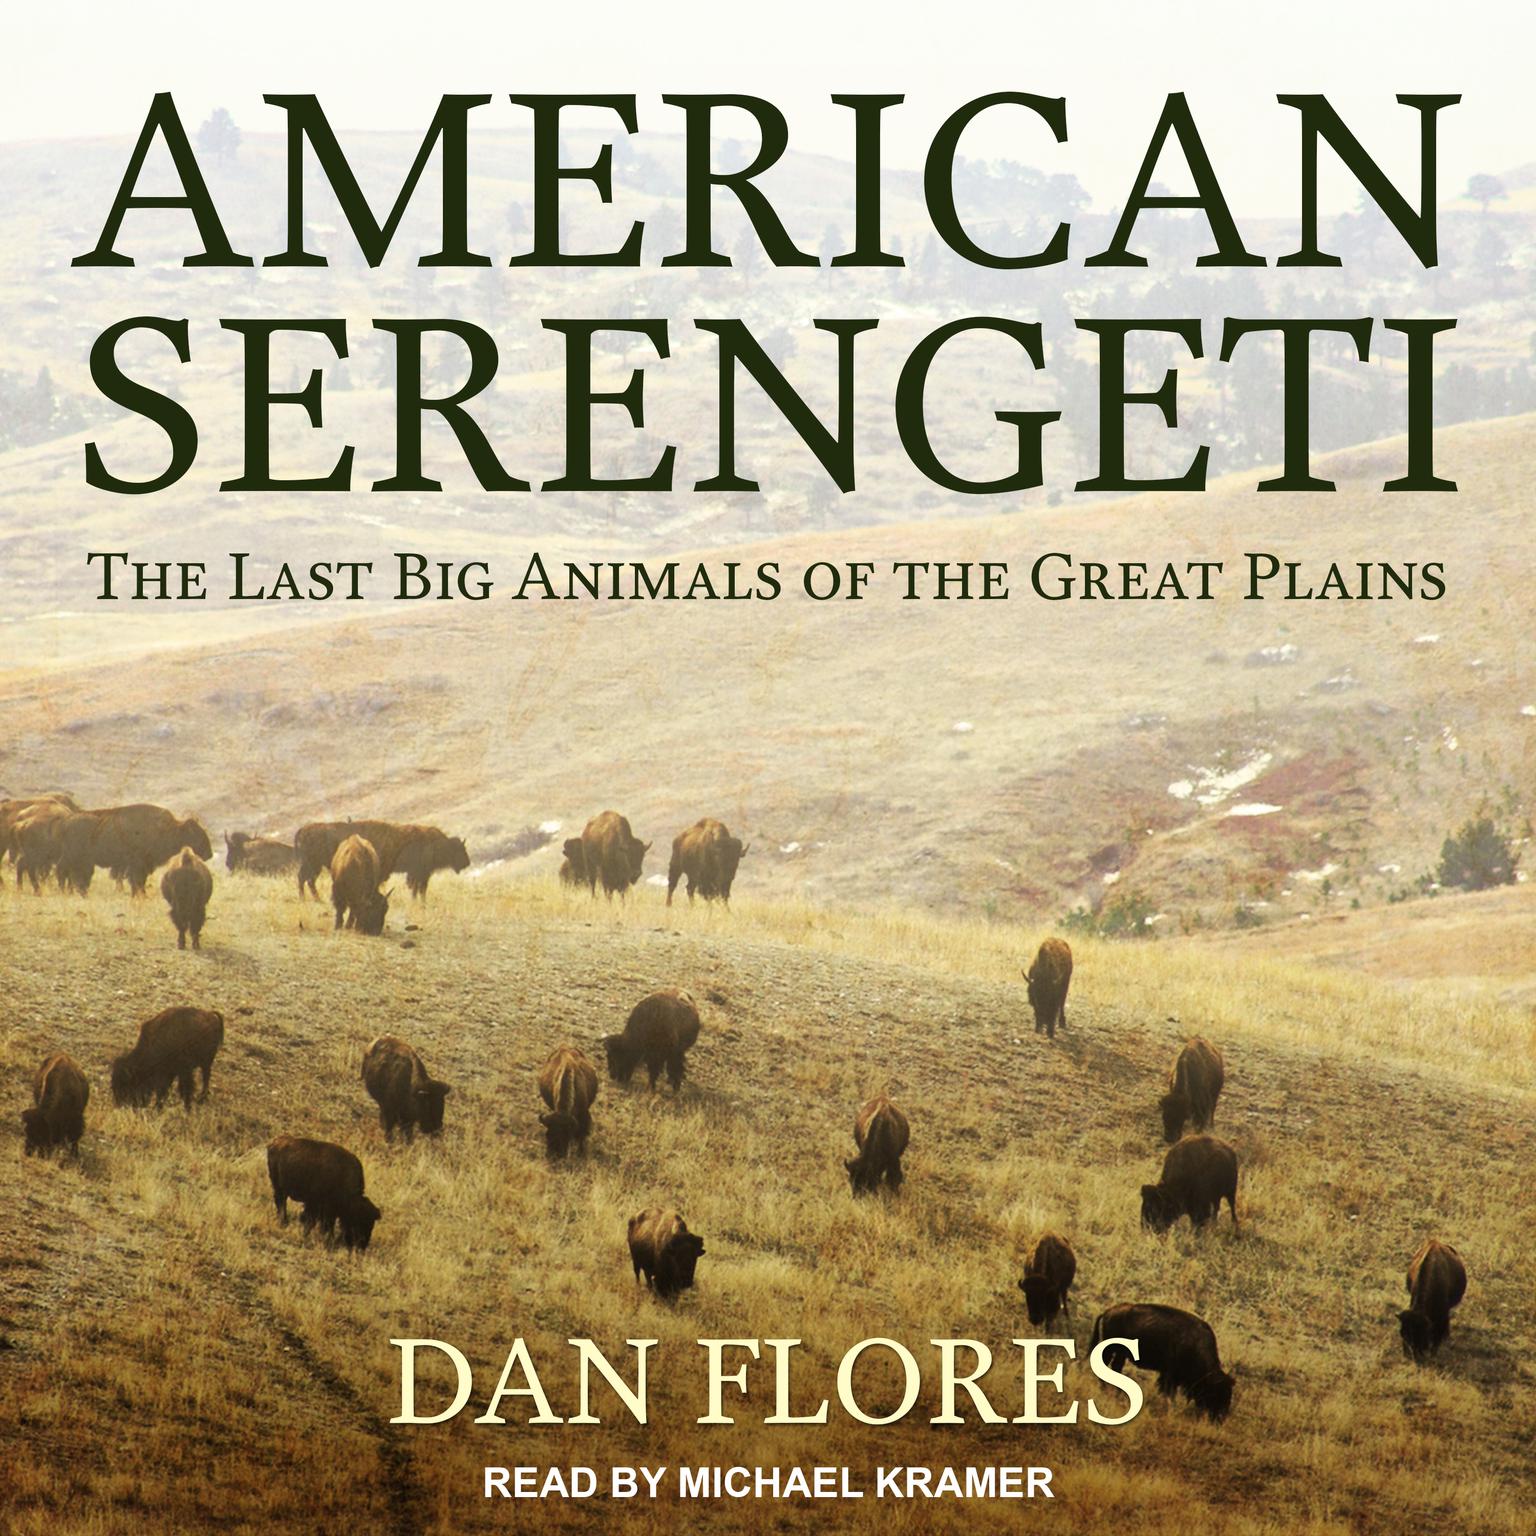 American Serengeti: The Last Big Animals of the Great Plains Audiobook, by Dan Flores